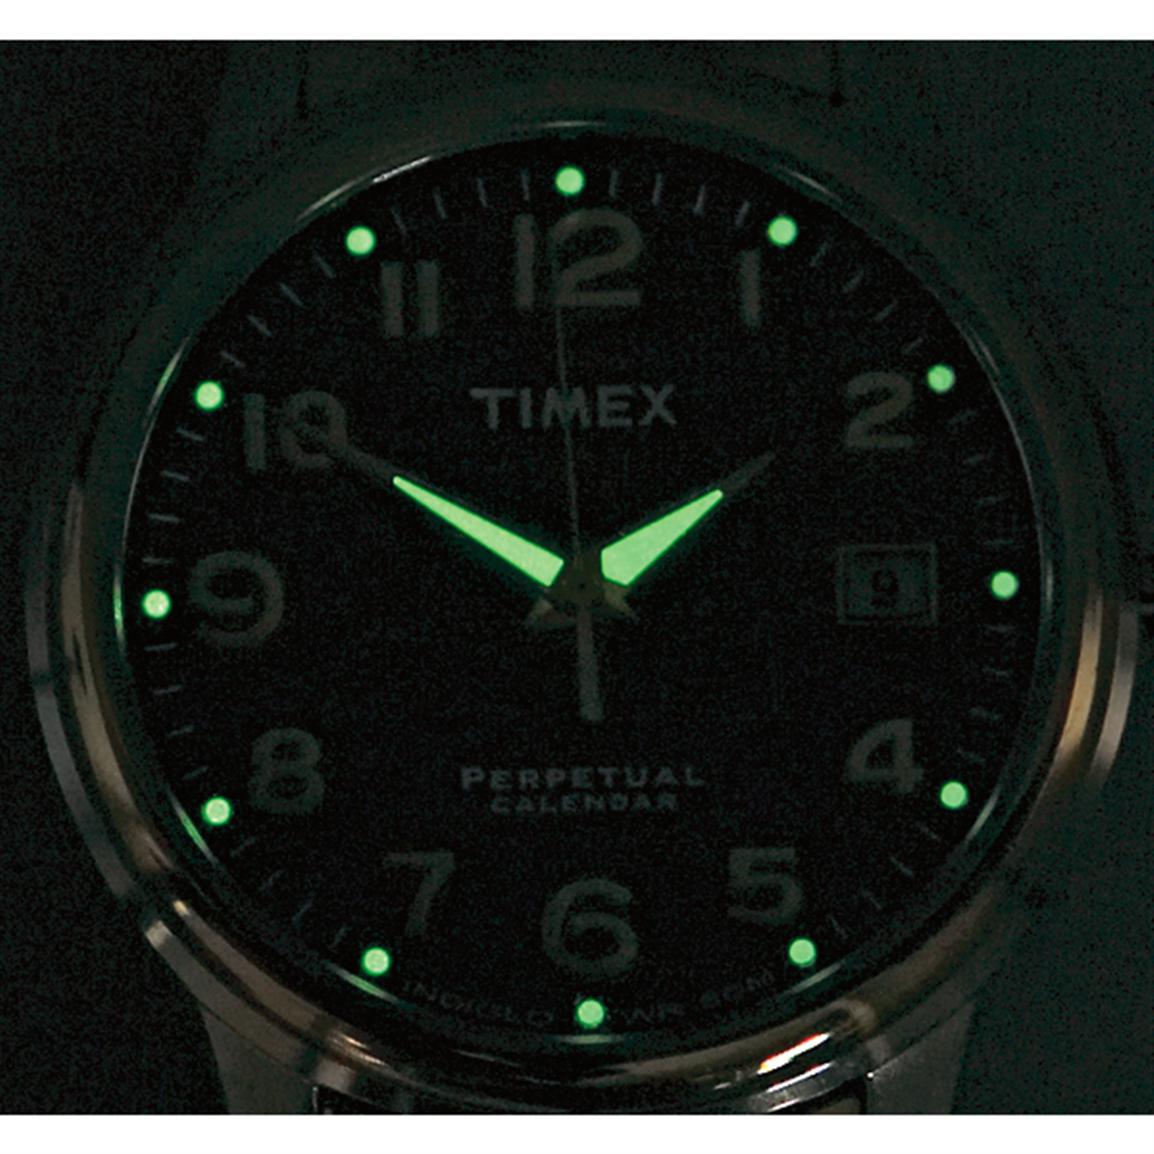 Timex® Perpetual Calendar Watch 177743 Watches at Sportsman #39 s Guide